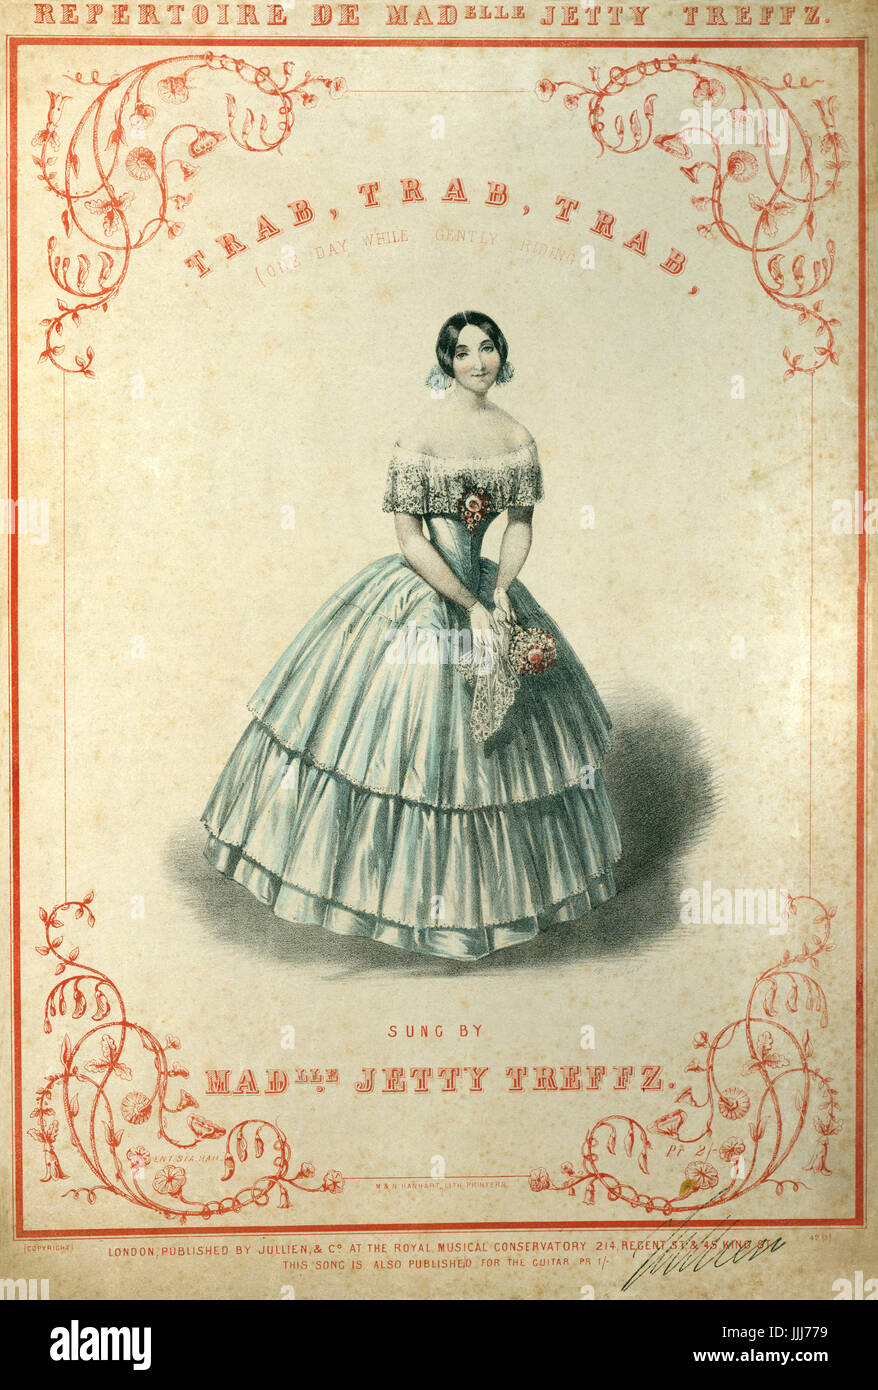 Trab, Trab, Trab (or, One Day While Gently Riding) score cover, from the repertoire de Madelle Jetty Treffz. Sung by Henrietta Treffz (1818-1878), lithograph by M. H. Hanhart, published in London by Jullien & Co.. Stock Photo